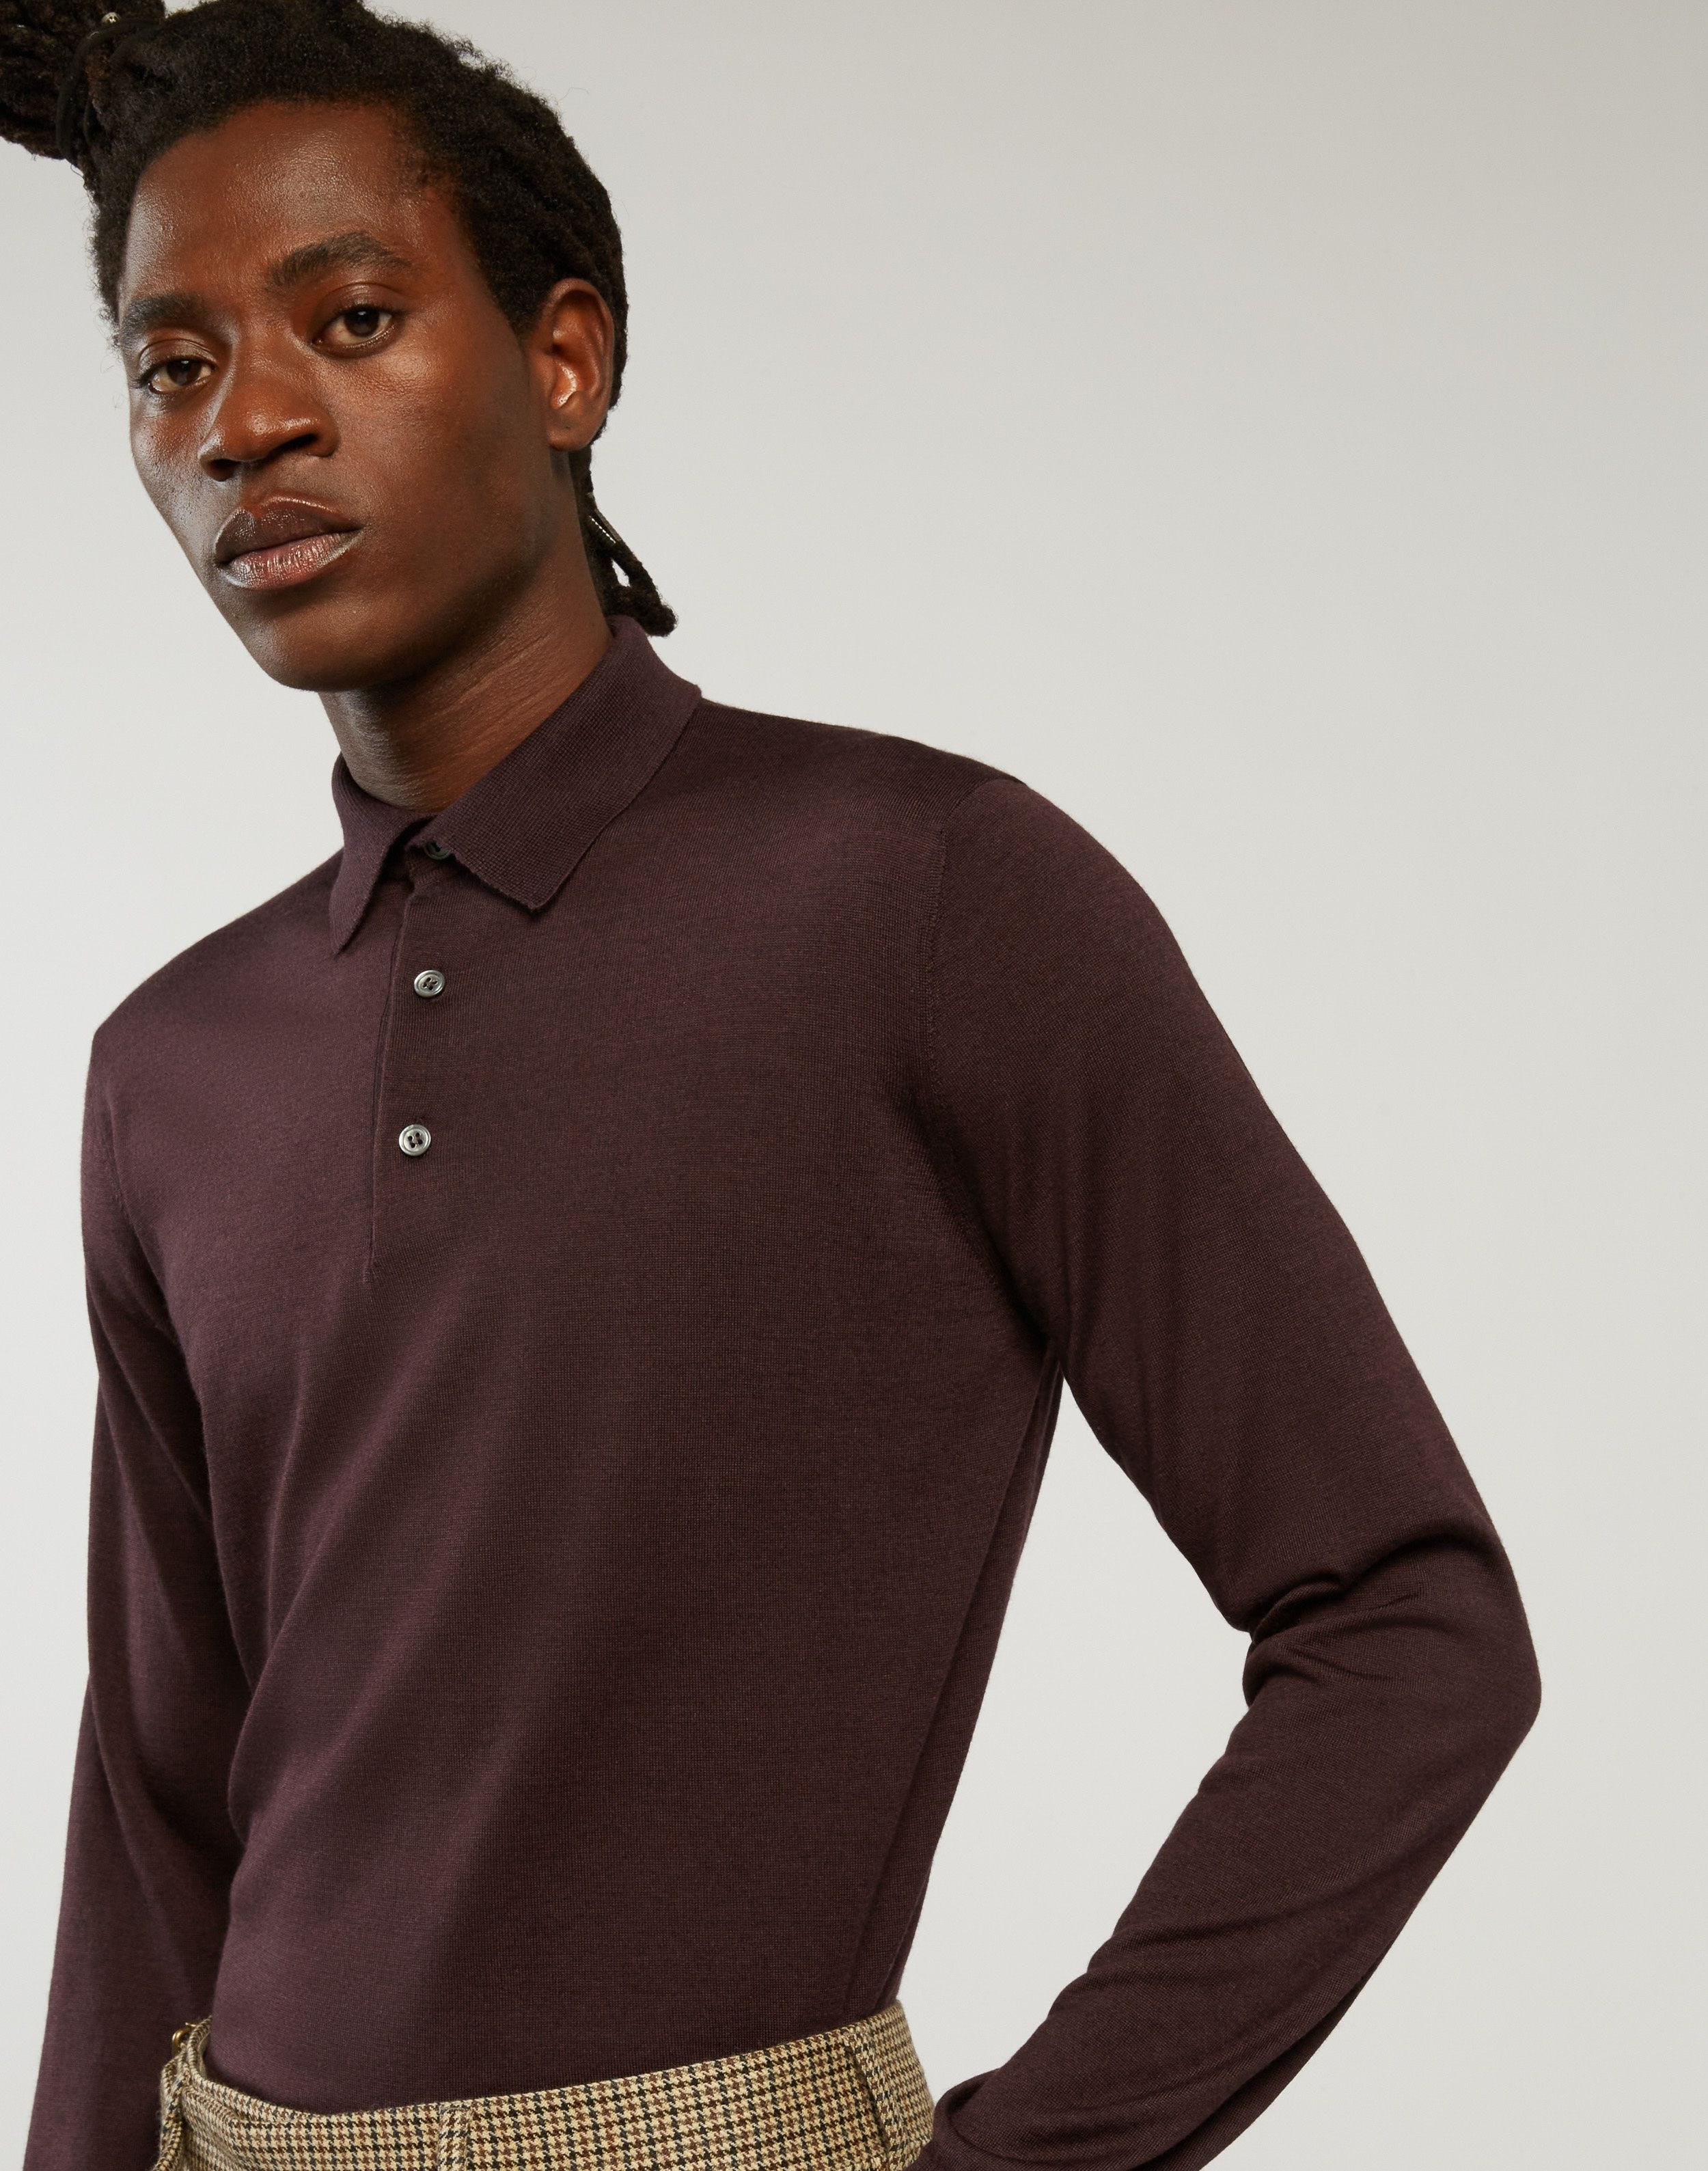 Long-sleeve polo shirt in burgundy cashmere